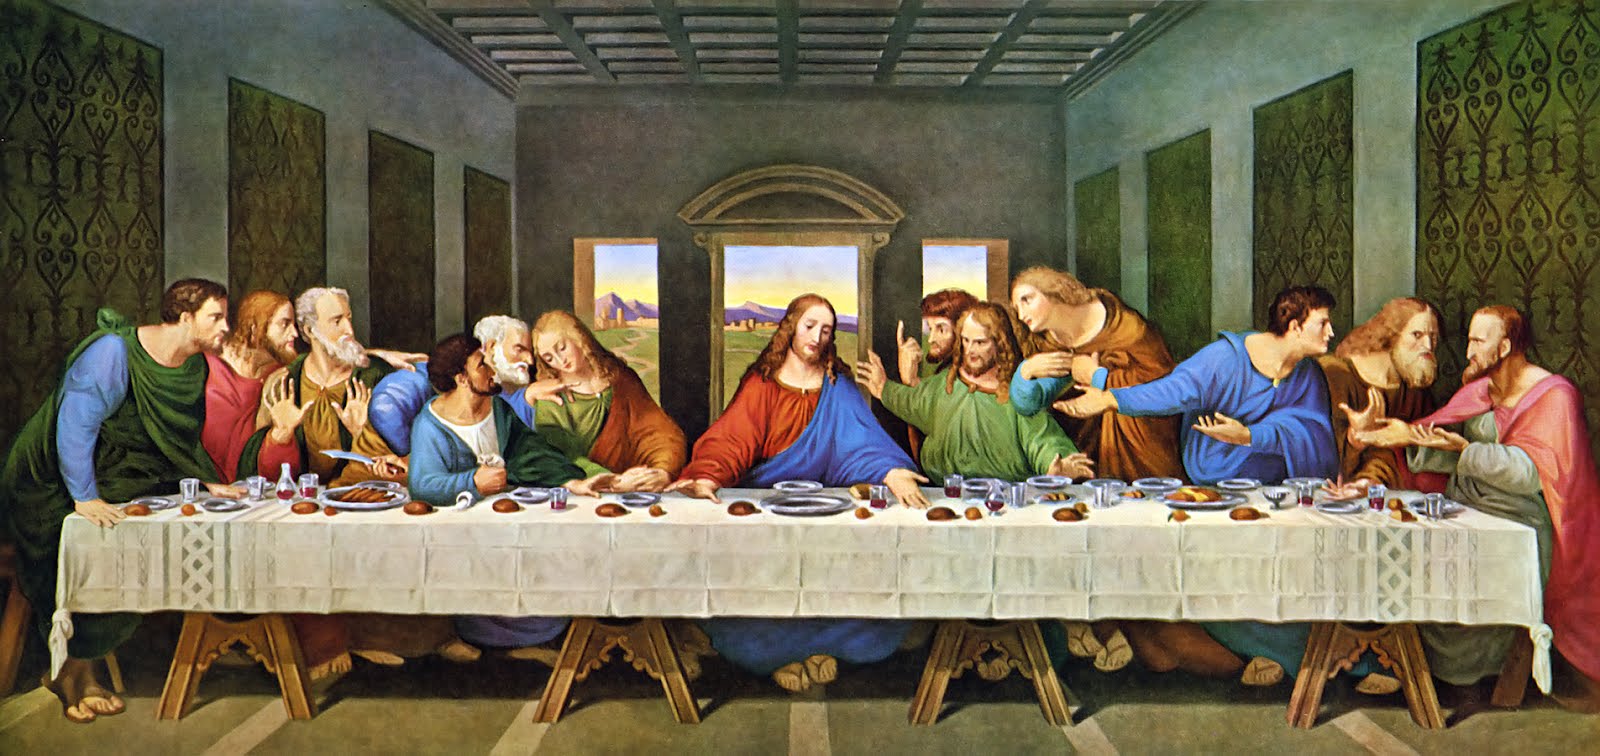 Free download Wallpaper of The Last Supper Jesus and his disciples Passion for [1600x756] for your Desktop, Mobile & Tablet. Explore The Last Supper Wallpaper. The Last Story Wallpaper